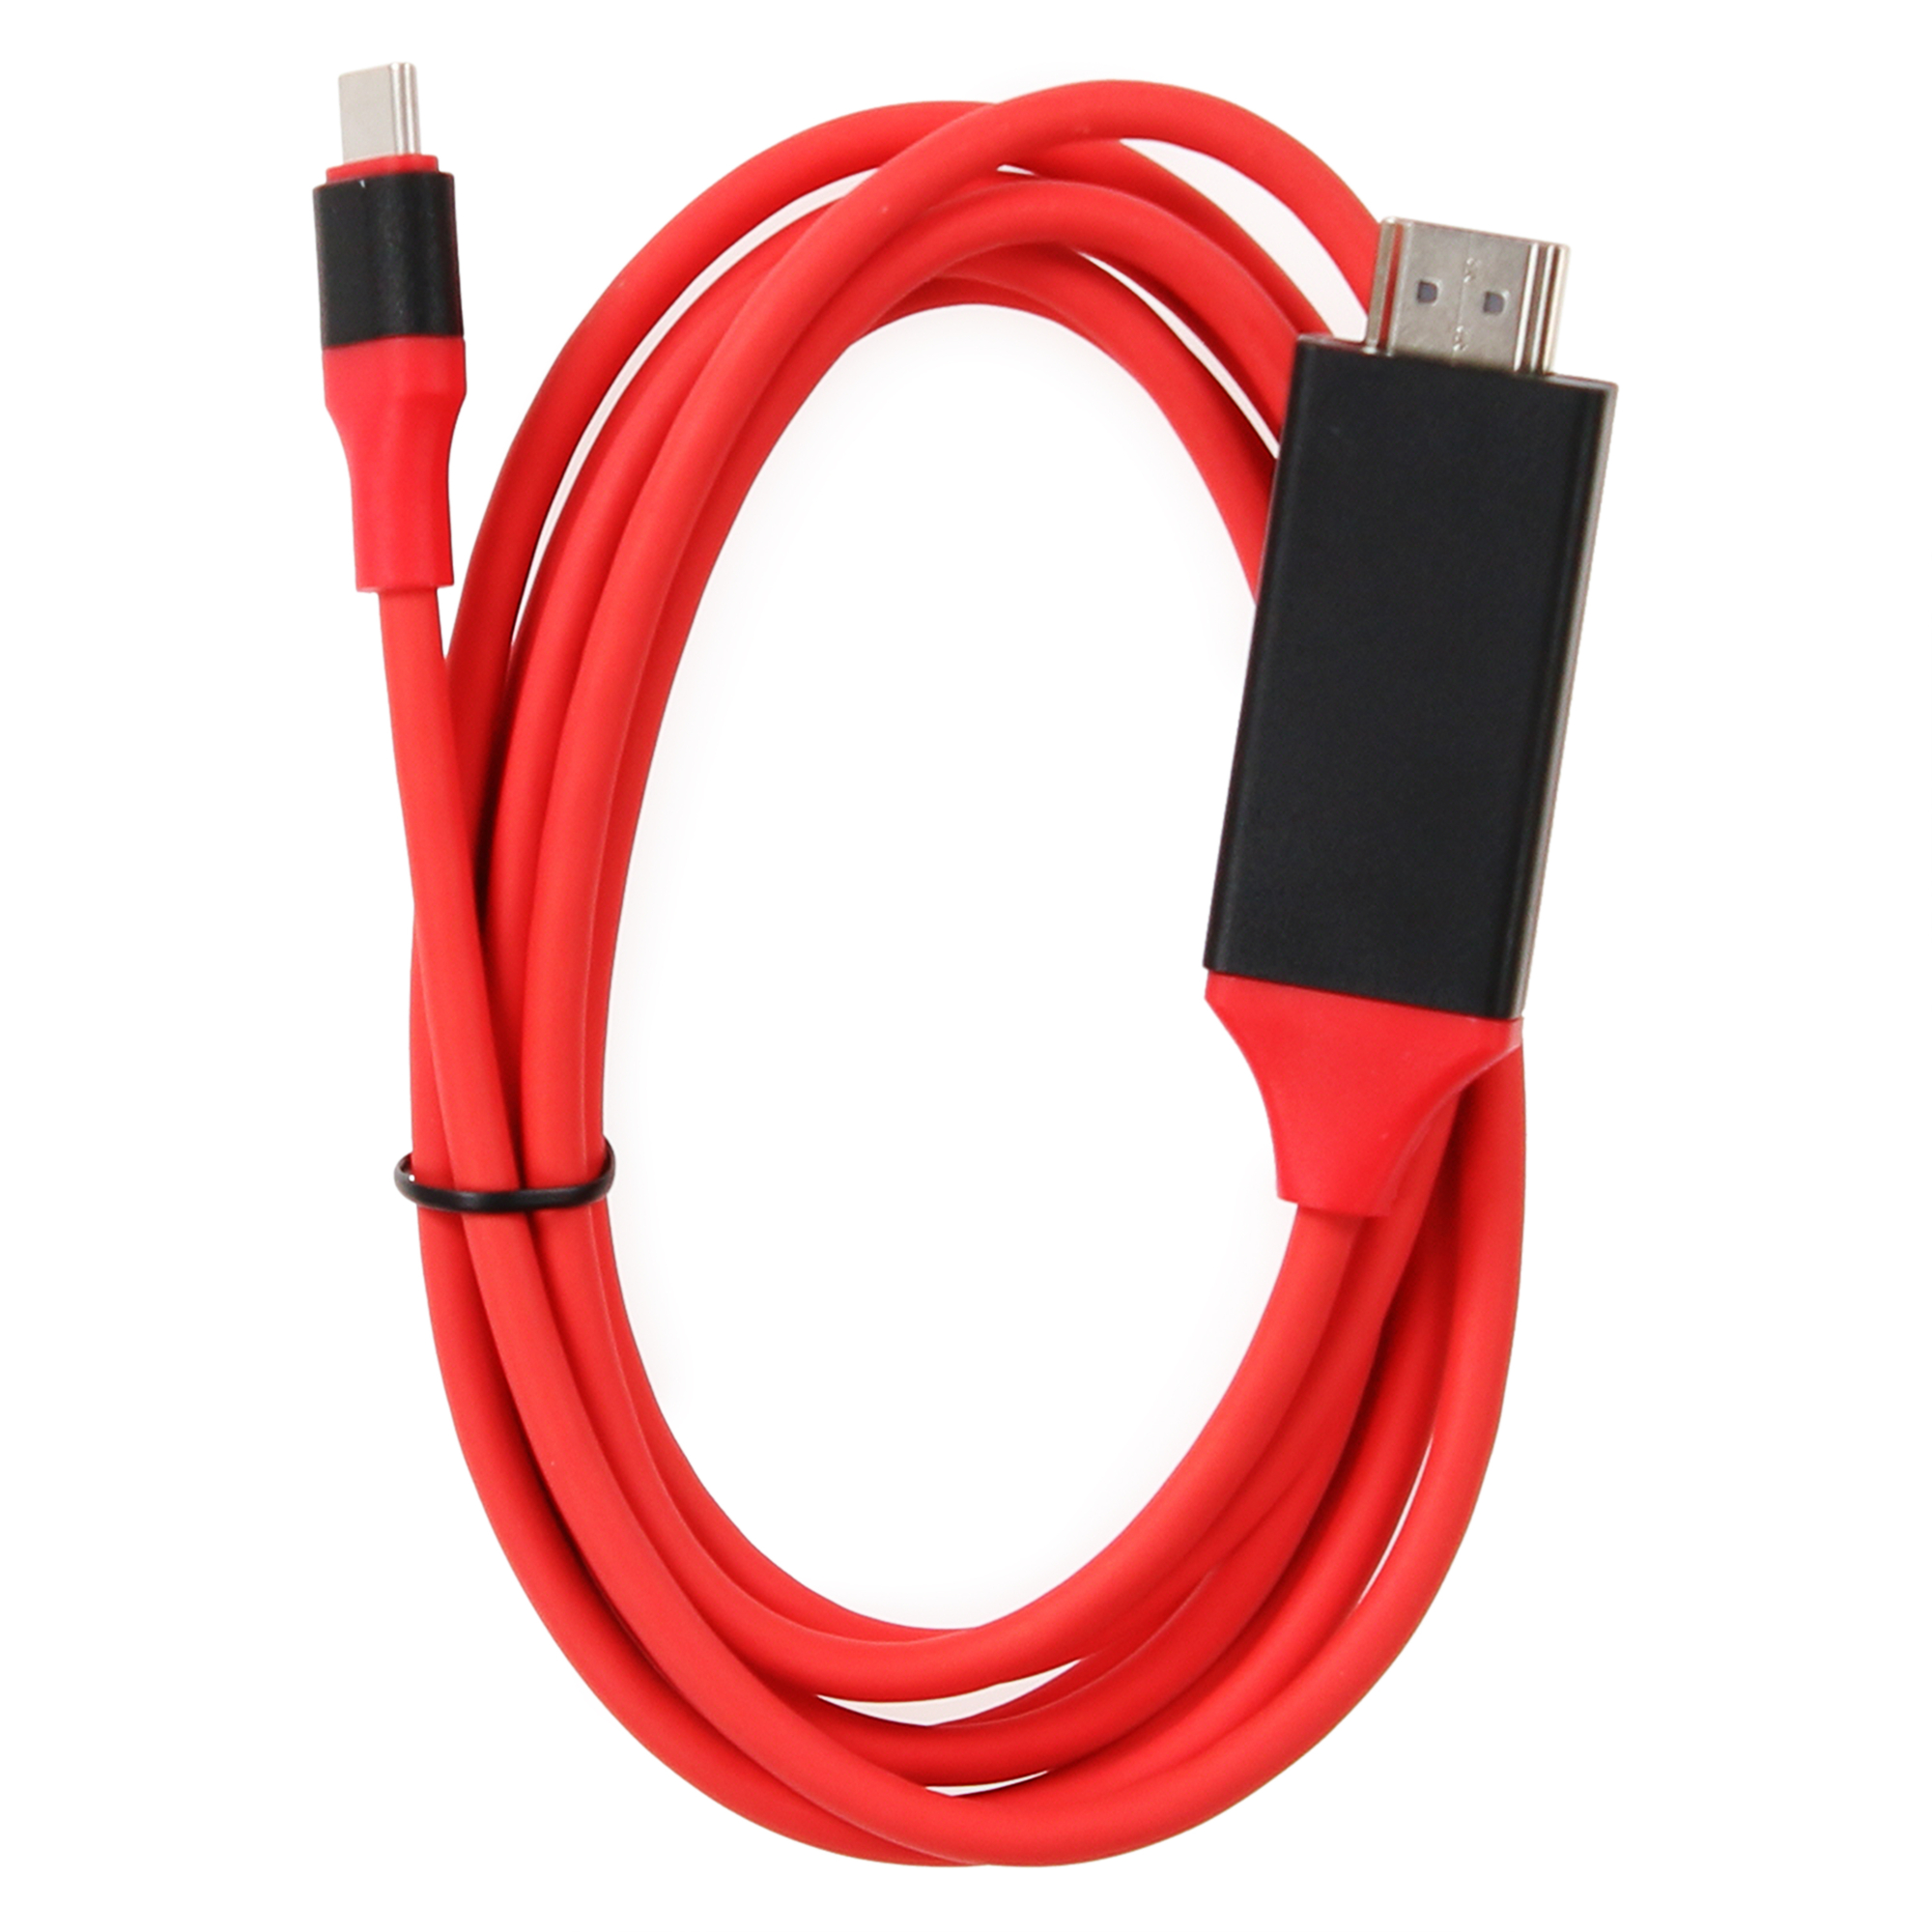 6ft USB-C to hdmi adapter cable